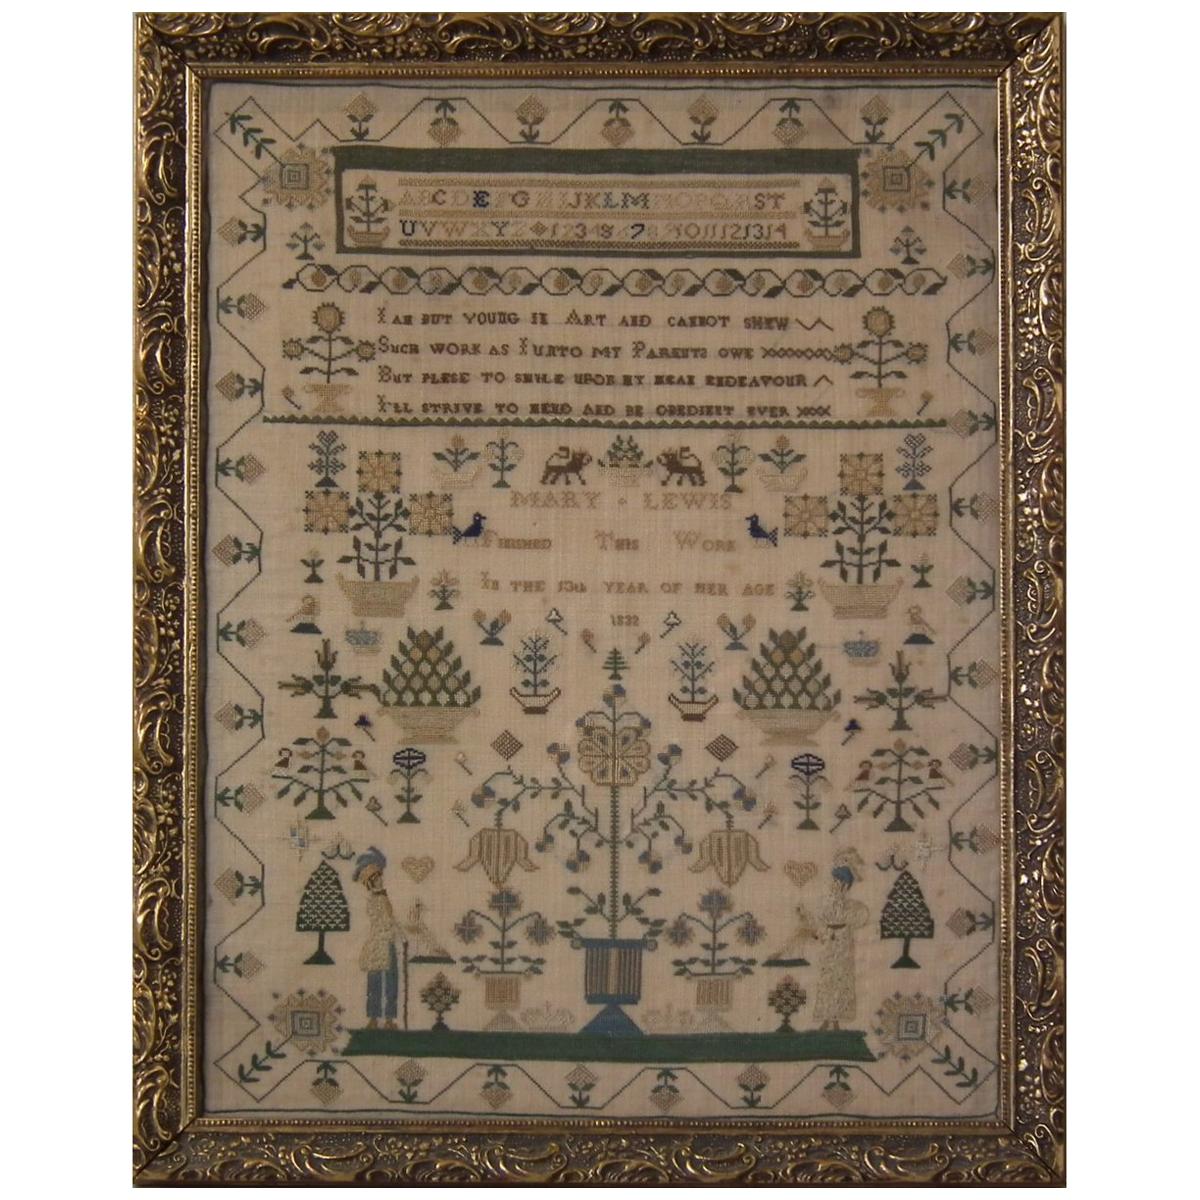 Antique Sampler, 1832 by Mary Lewis